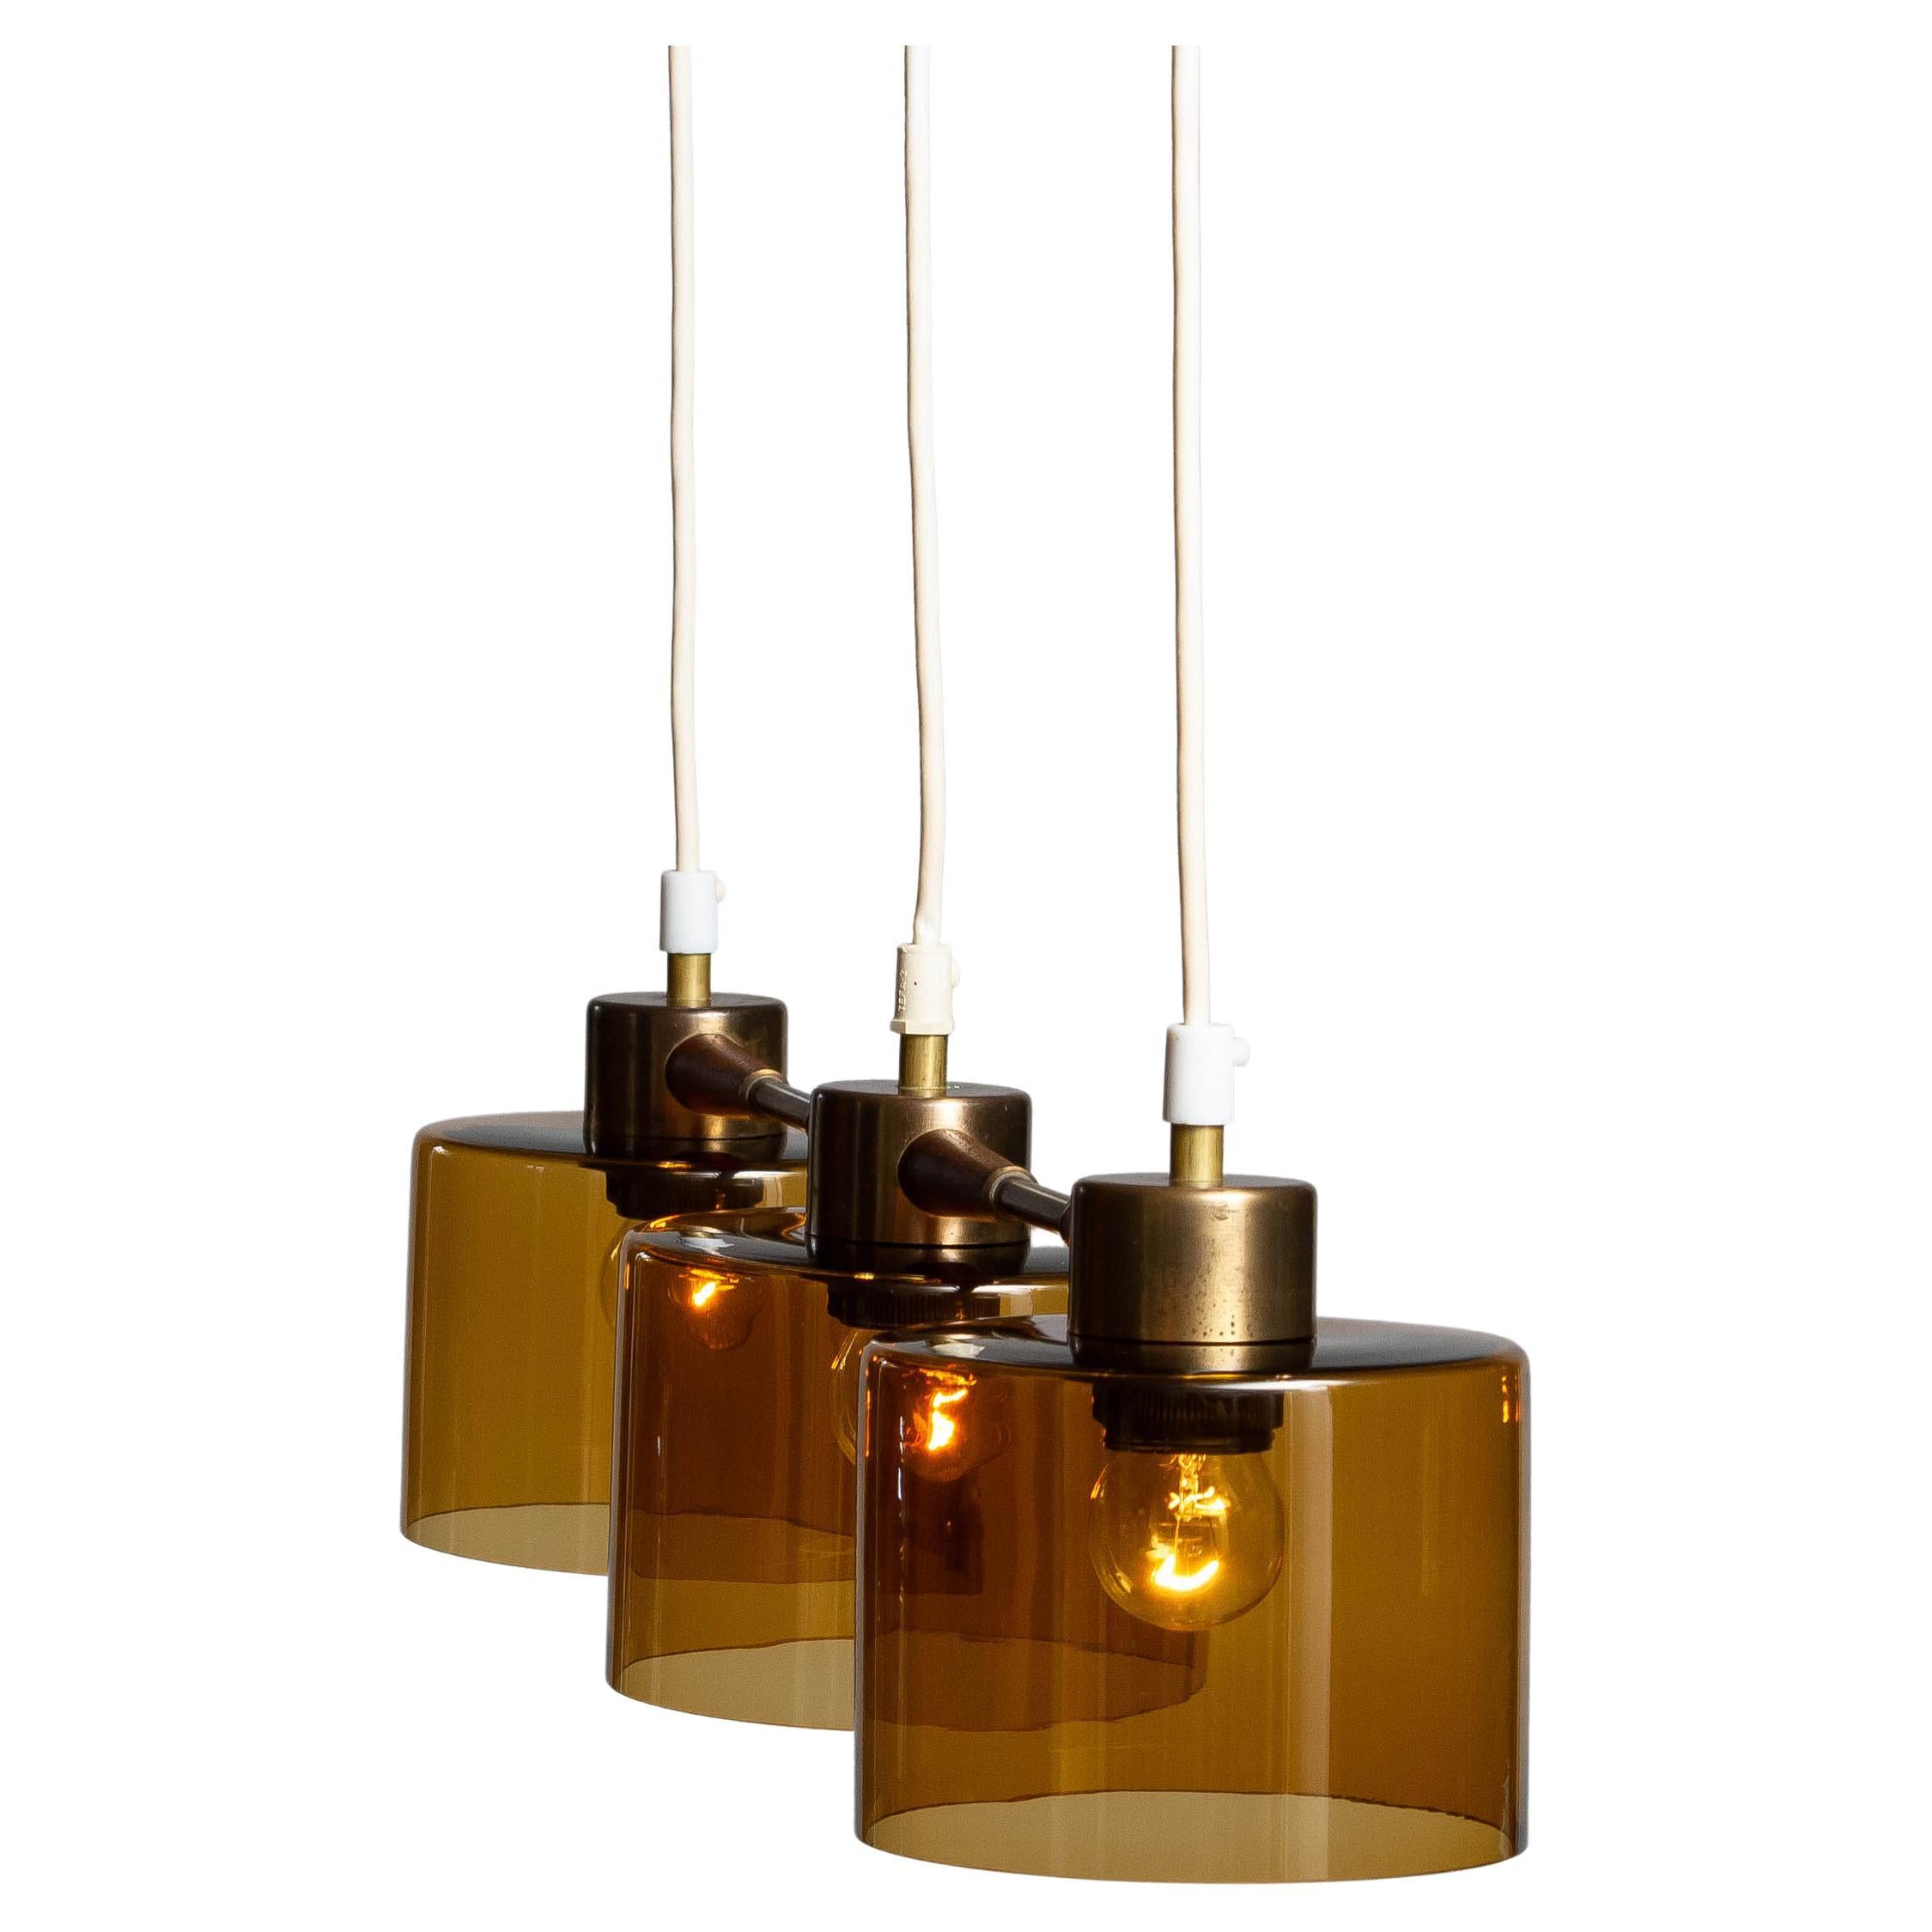 1960's Pendant with Amber Glass Shades by Carl Fagerlund for Orrefors Sweden